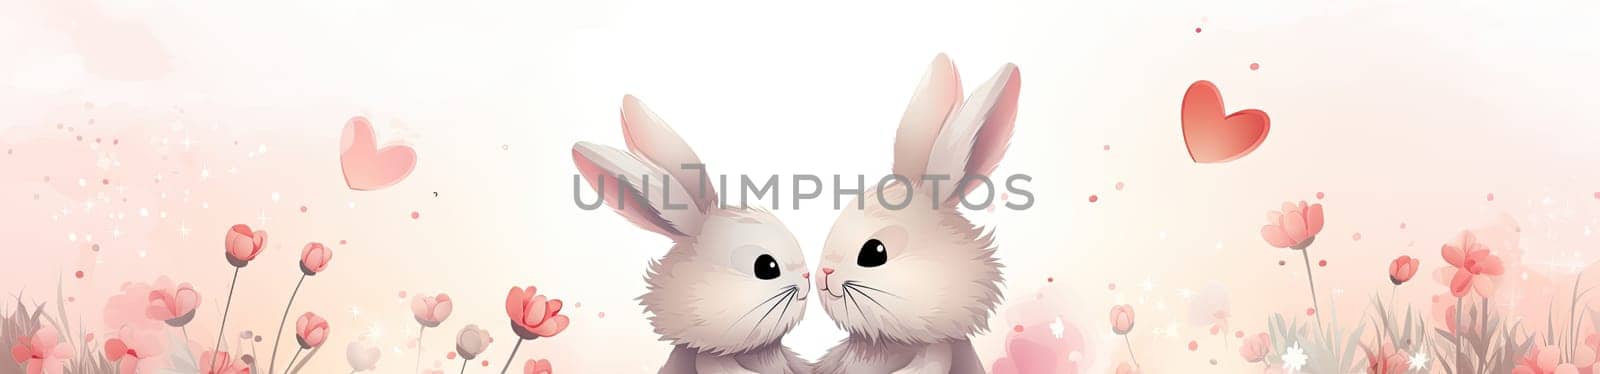 Cute couple of rabbits bunnies kissing together on an easter celebrated background with love